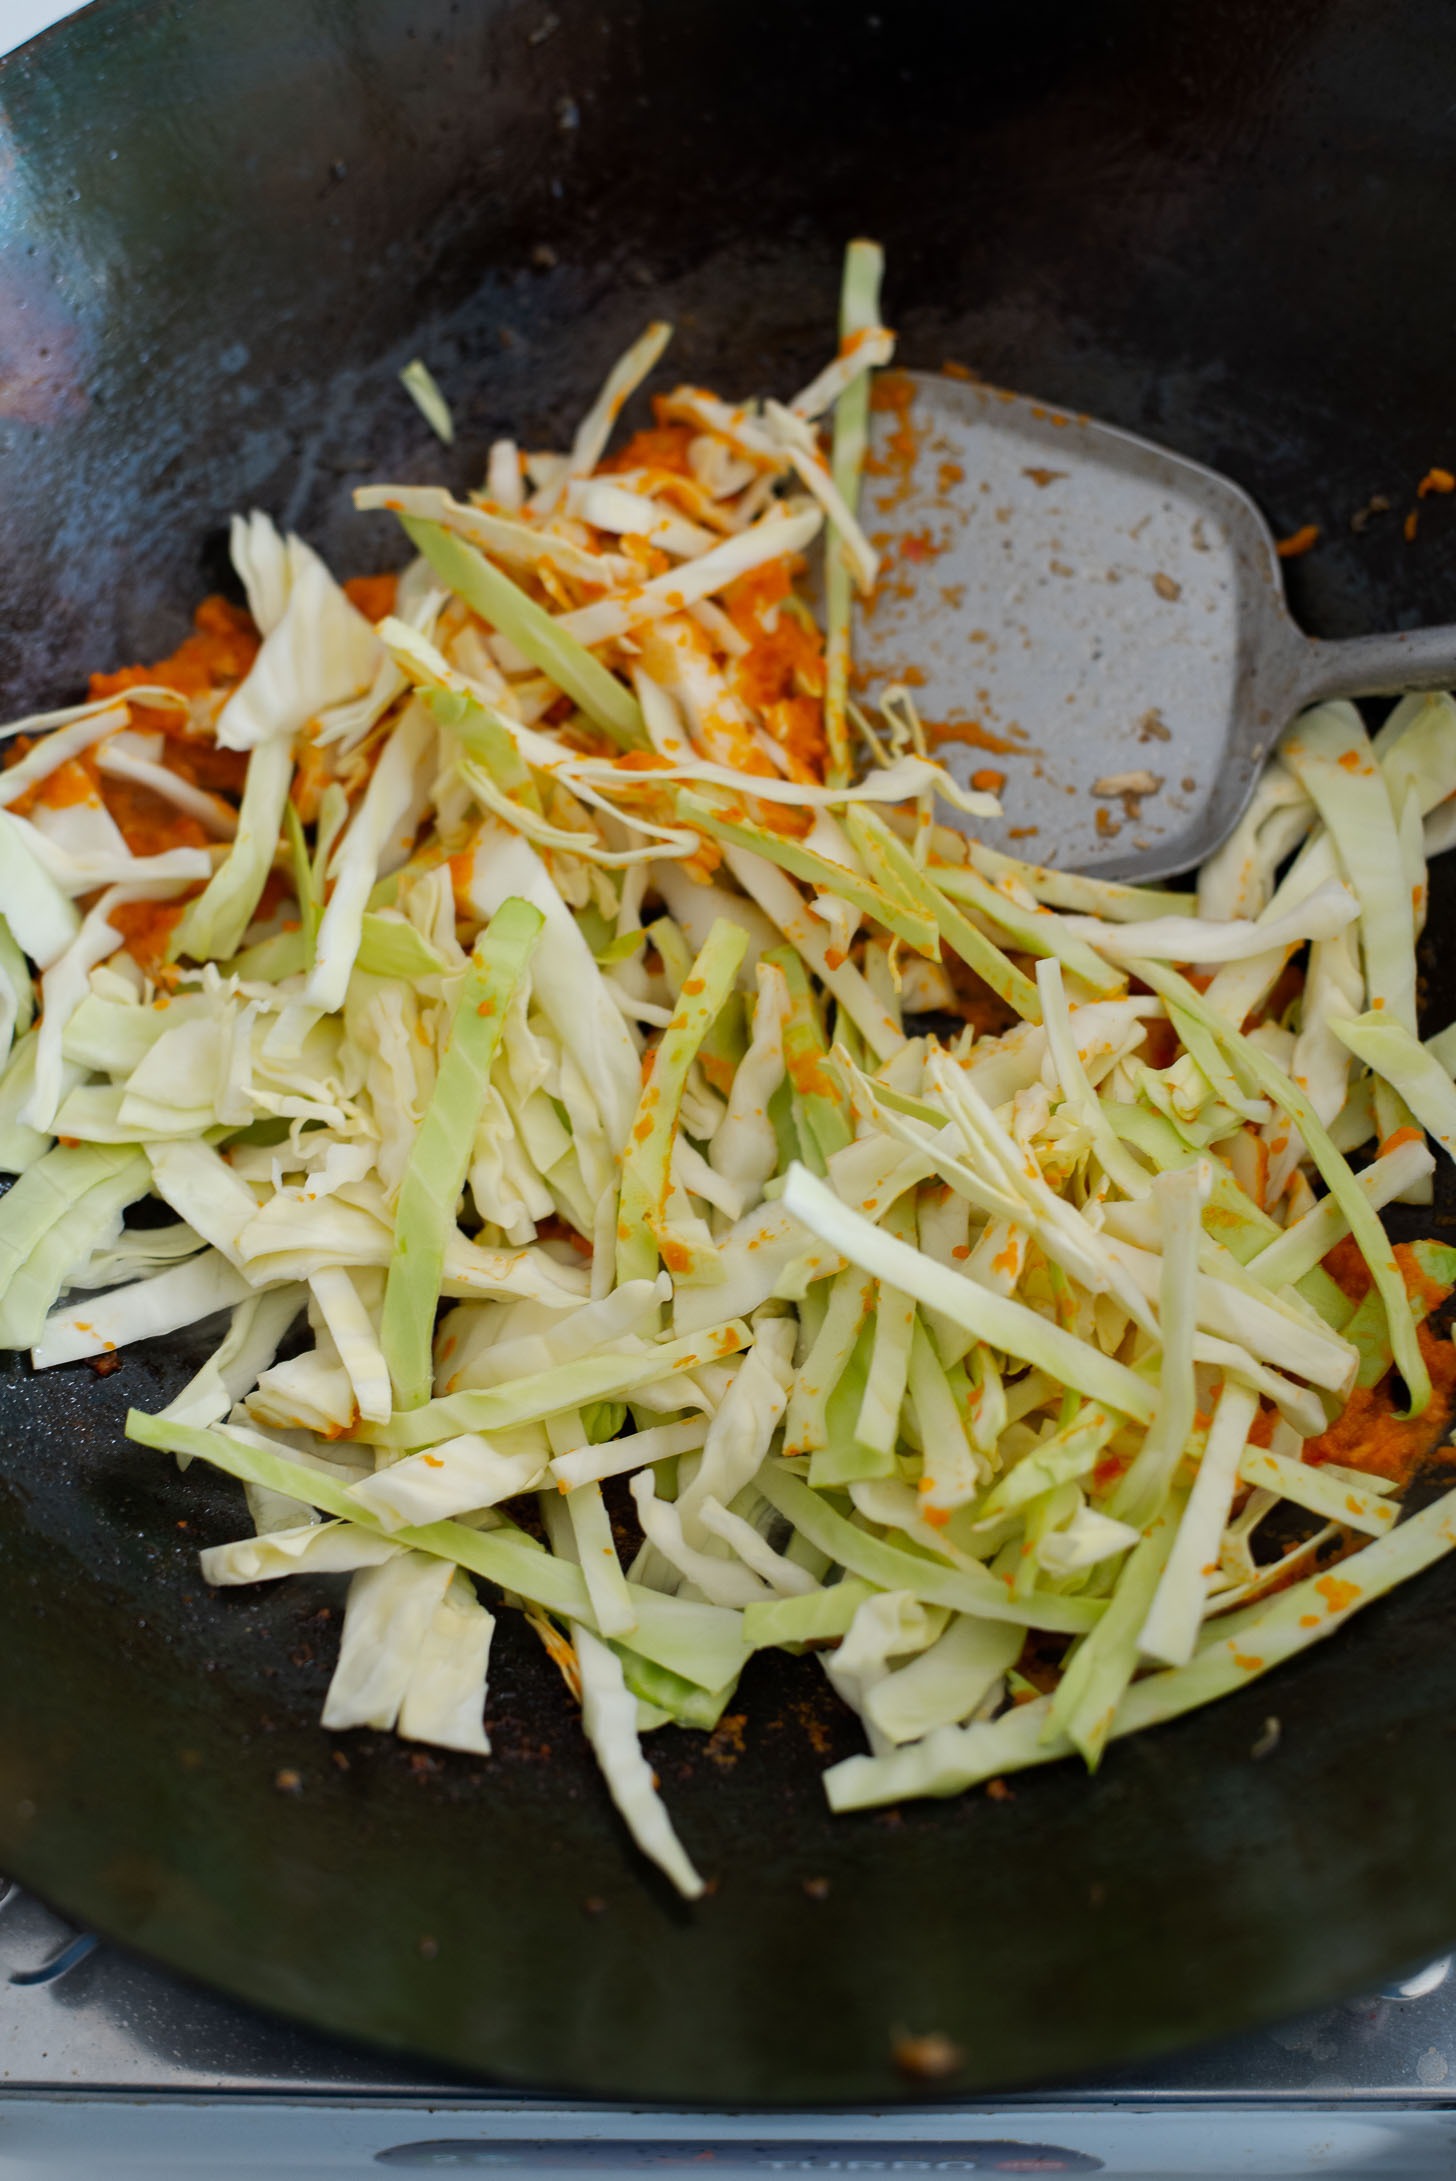 Cabbage slices are added to Nasi Goreng chili garlic in a wok 